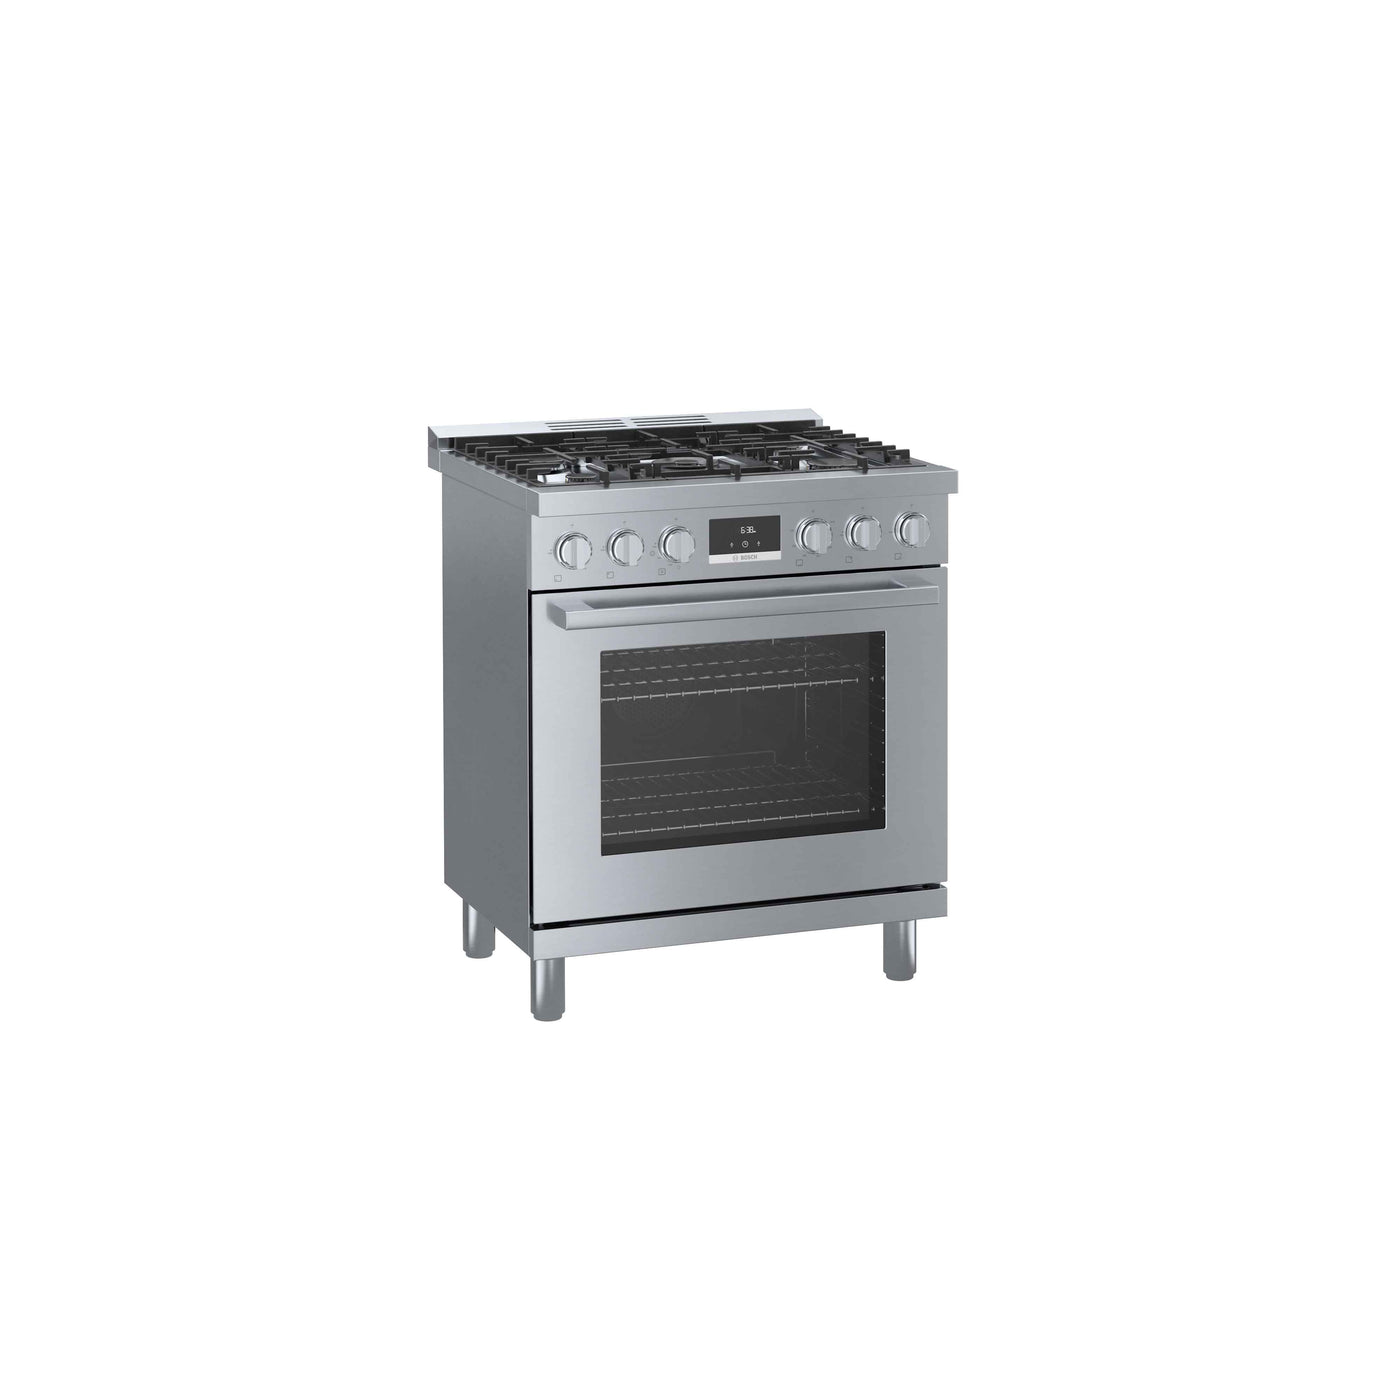 Bosch 30" Industrial Style Gas Range Stainless Steel - HGS8055UC